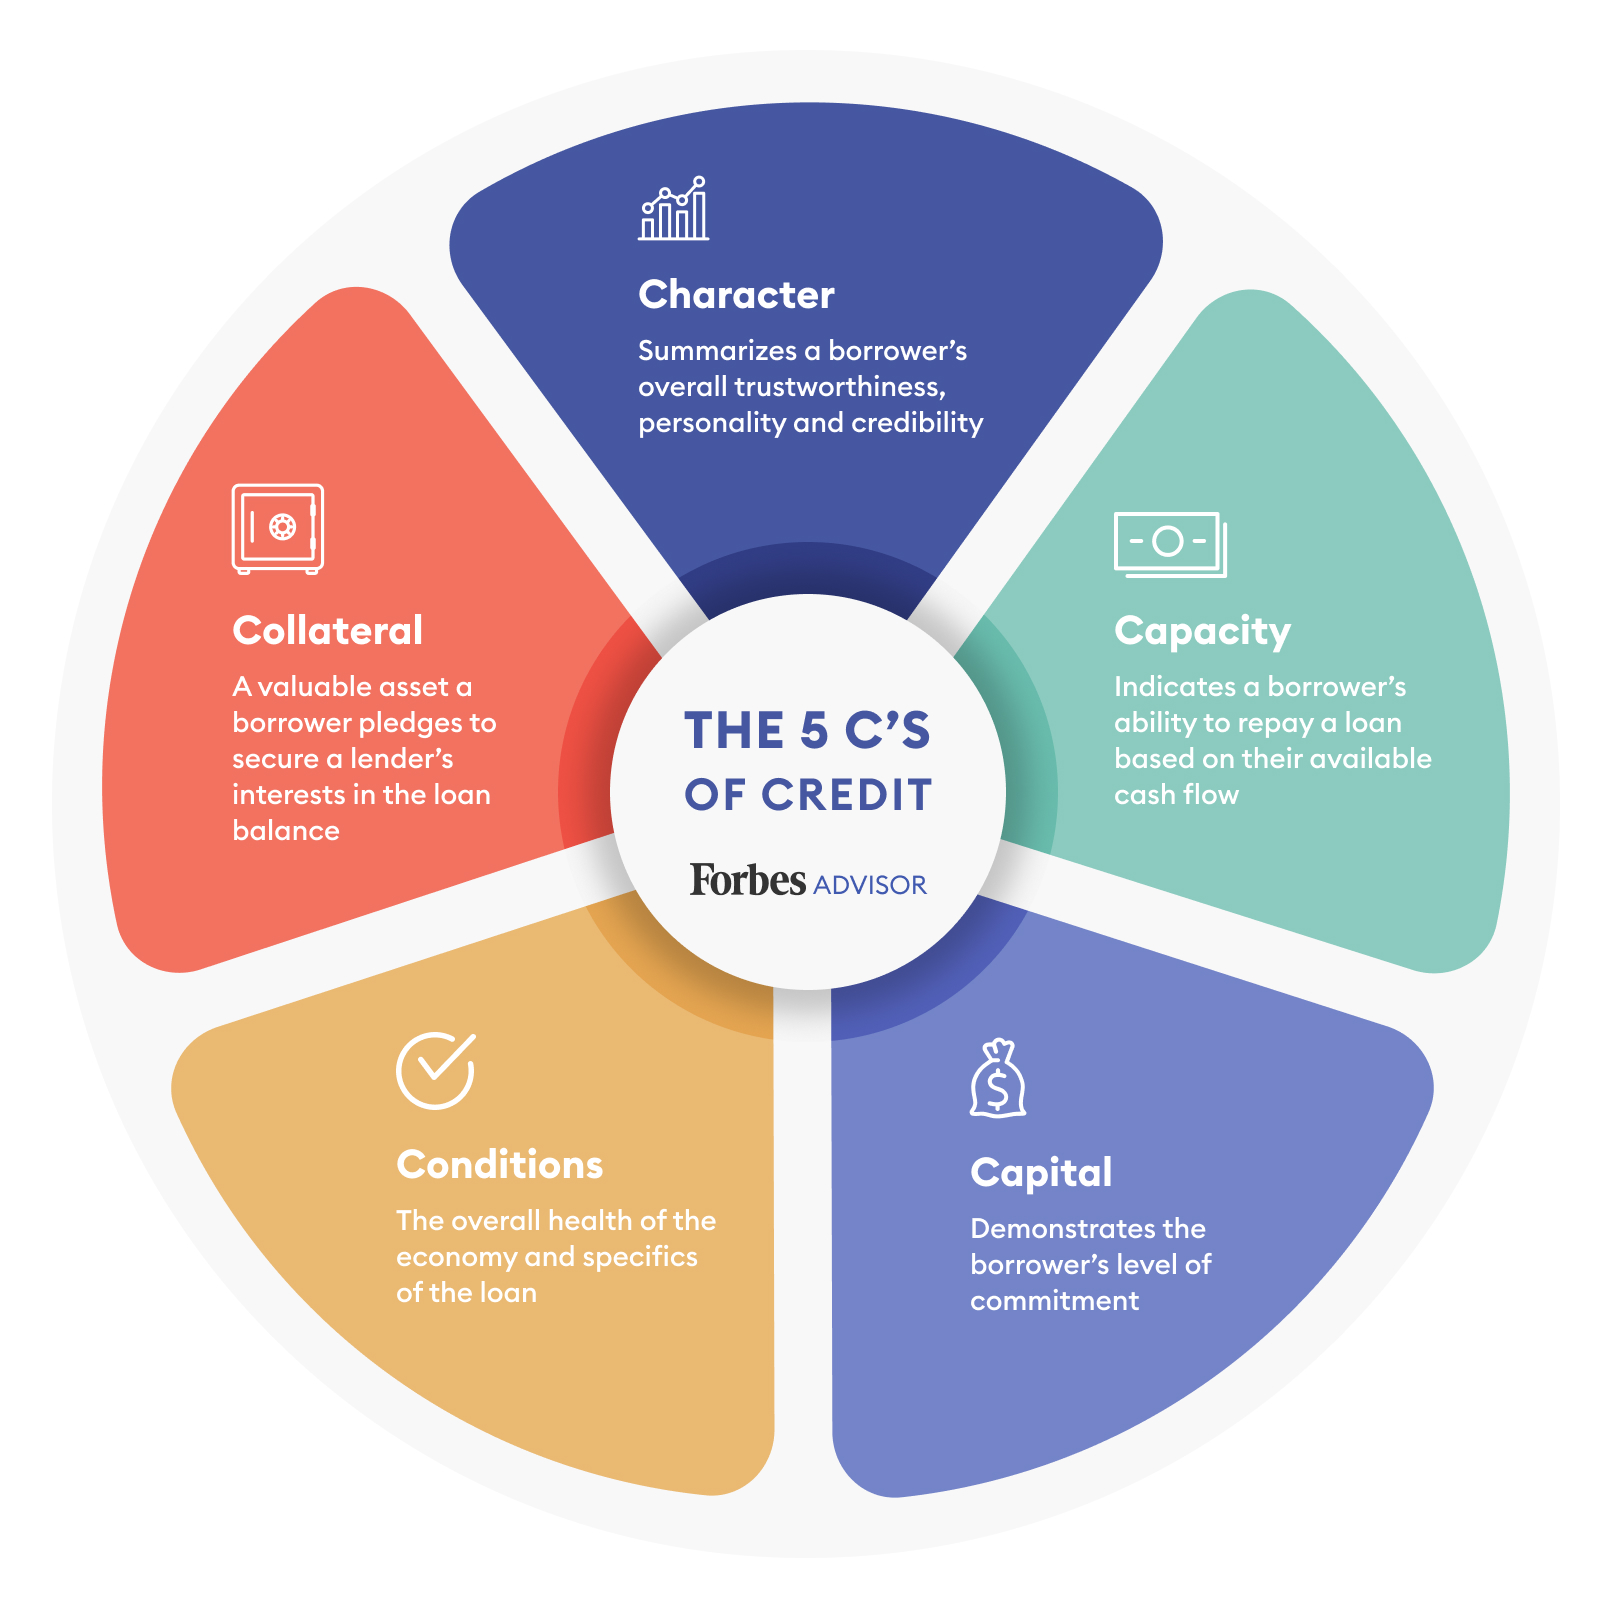 The 5 C's of Credit: What Are They And Why They're Important